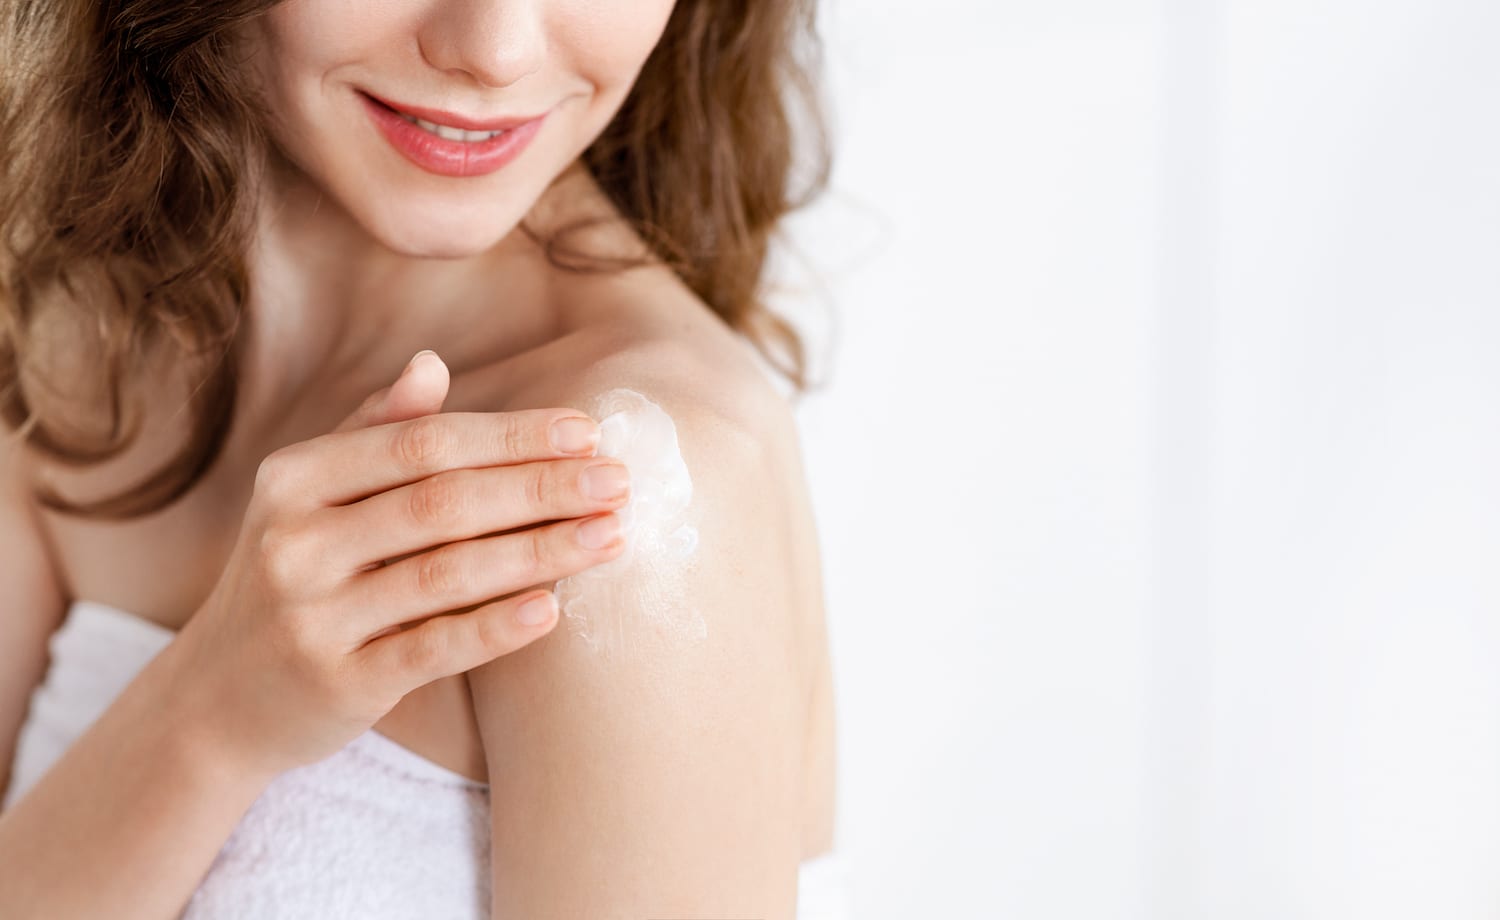 brunette woman in a towel applying lotion to her shoulder